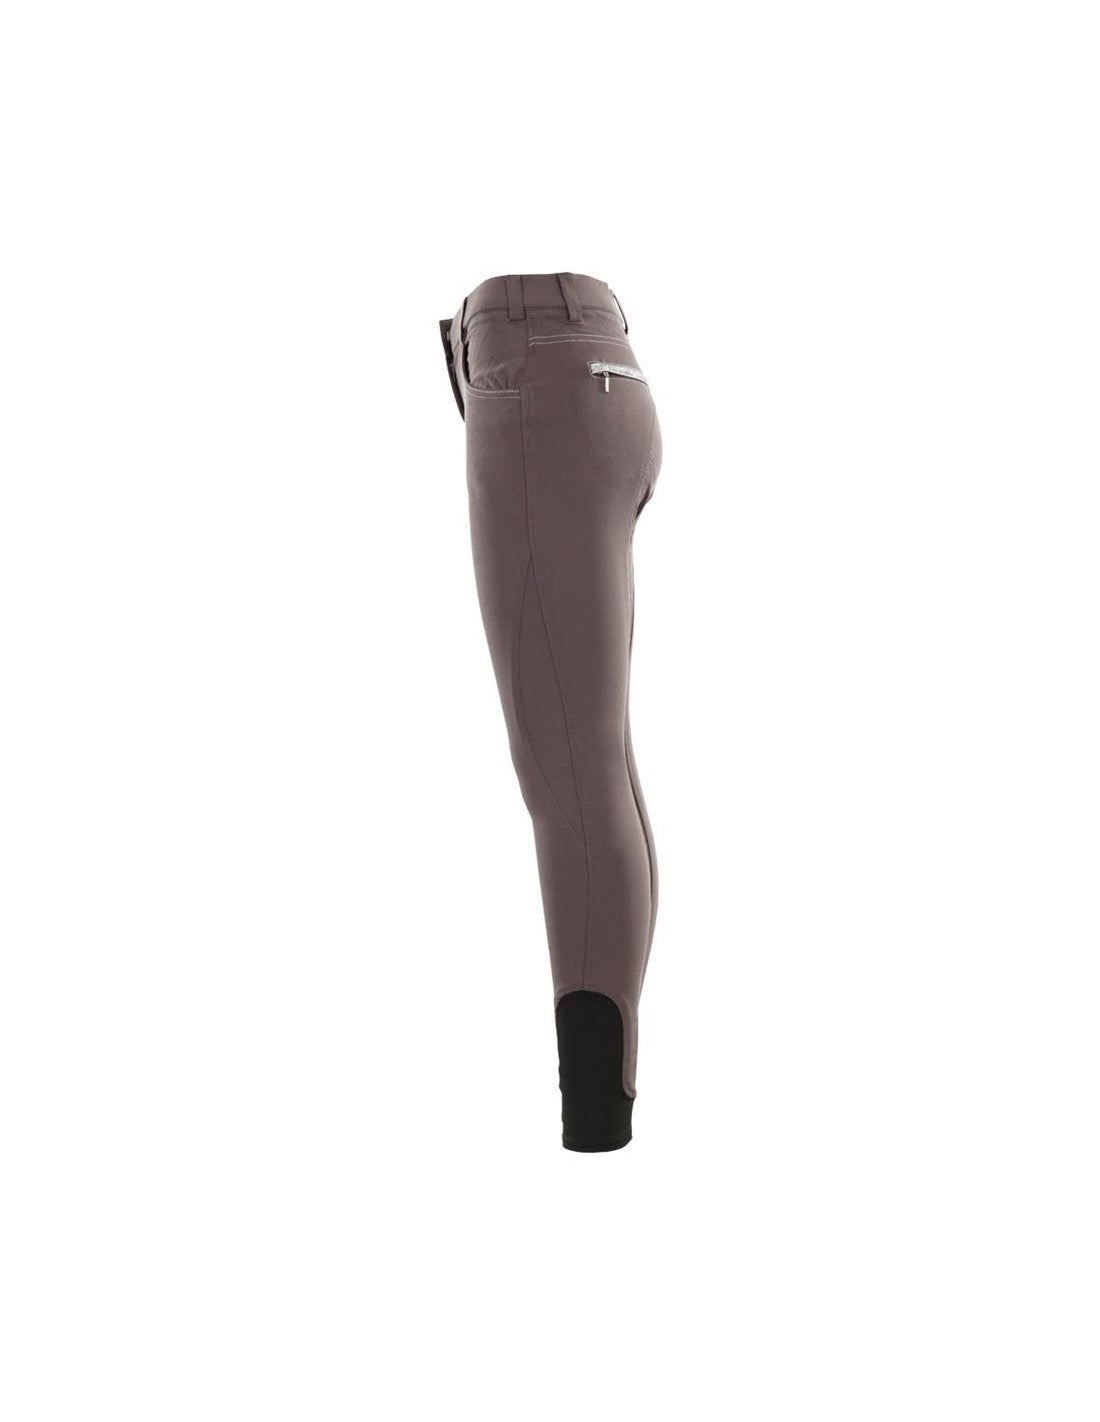 BR Equestrian Norina Full Grip Ladies Breeches - Brown - Size Euro 42/US 32 - limited edition